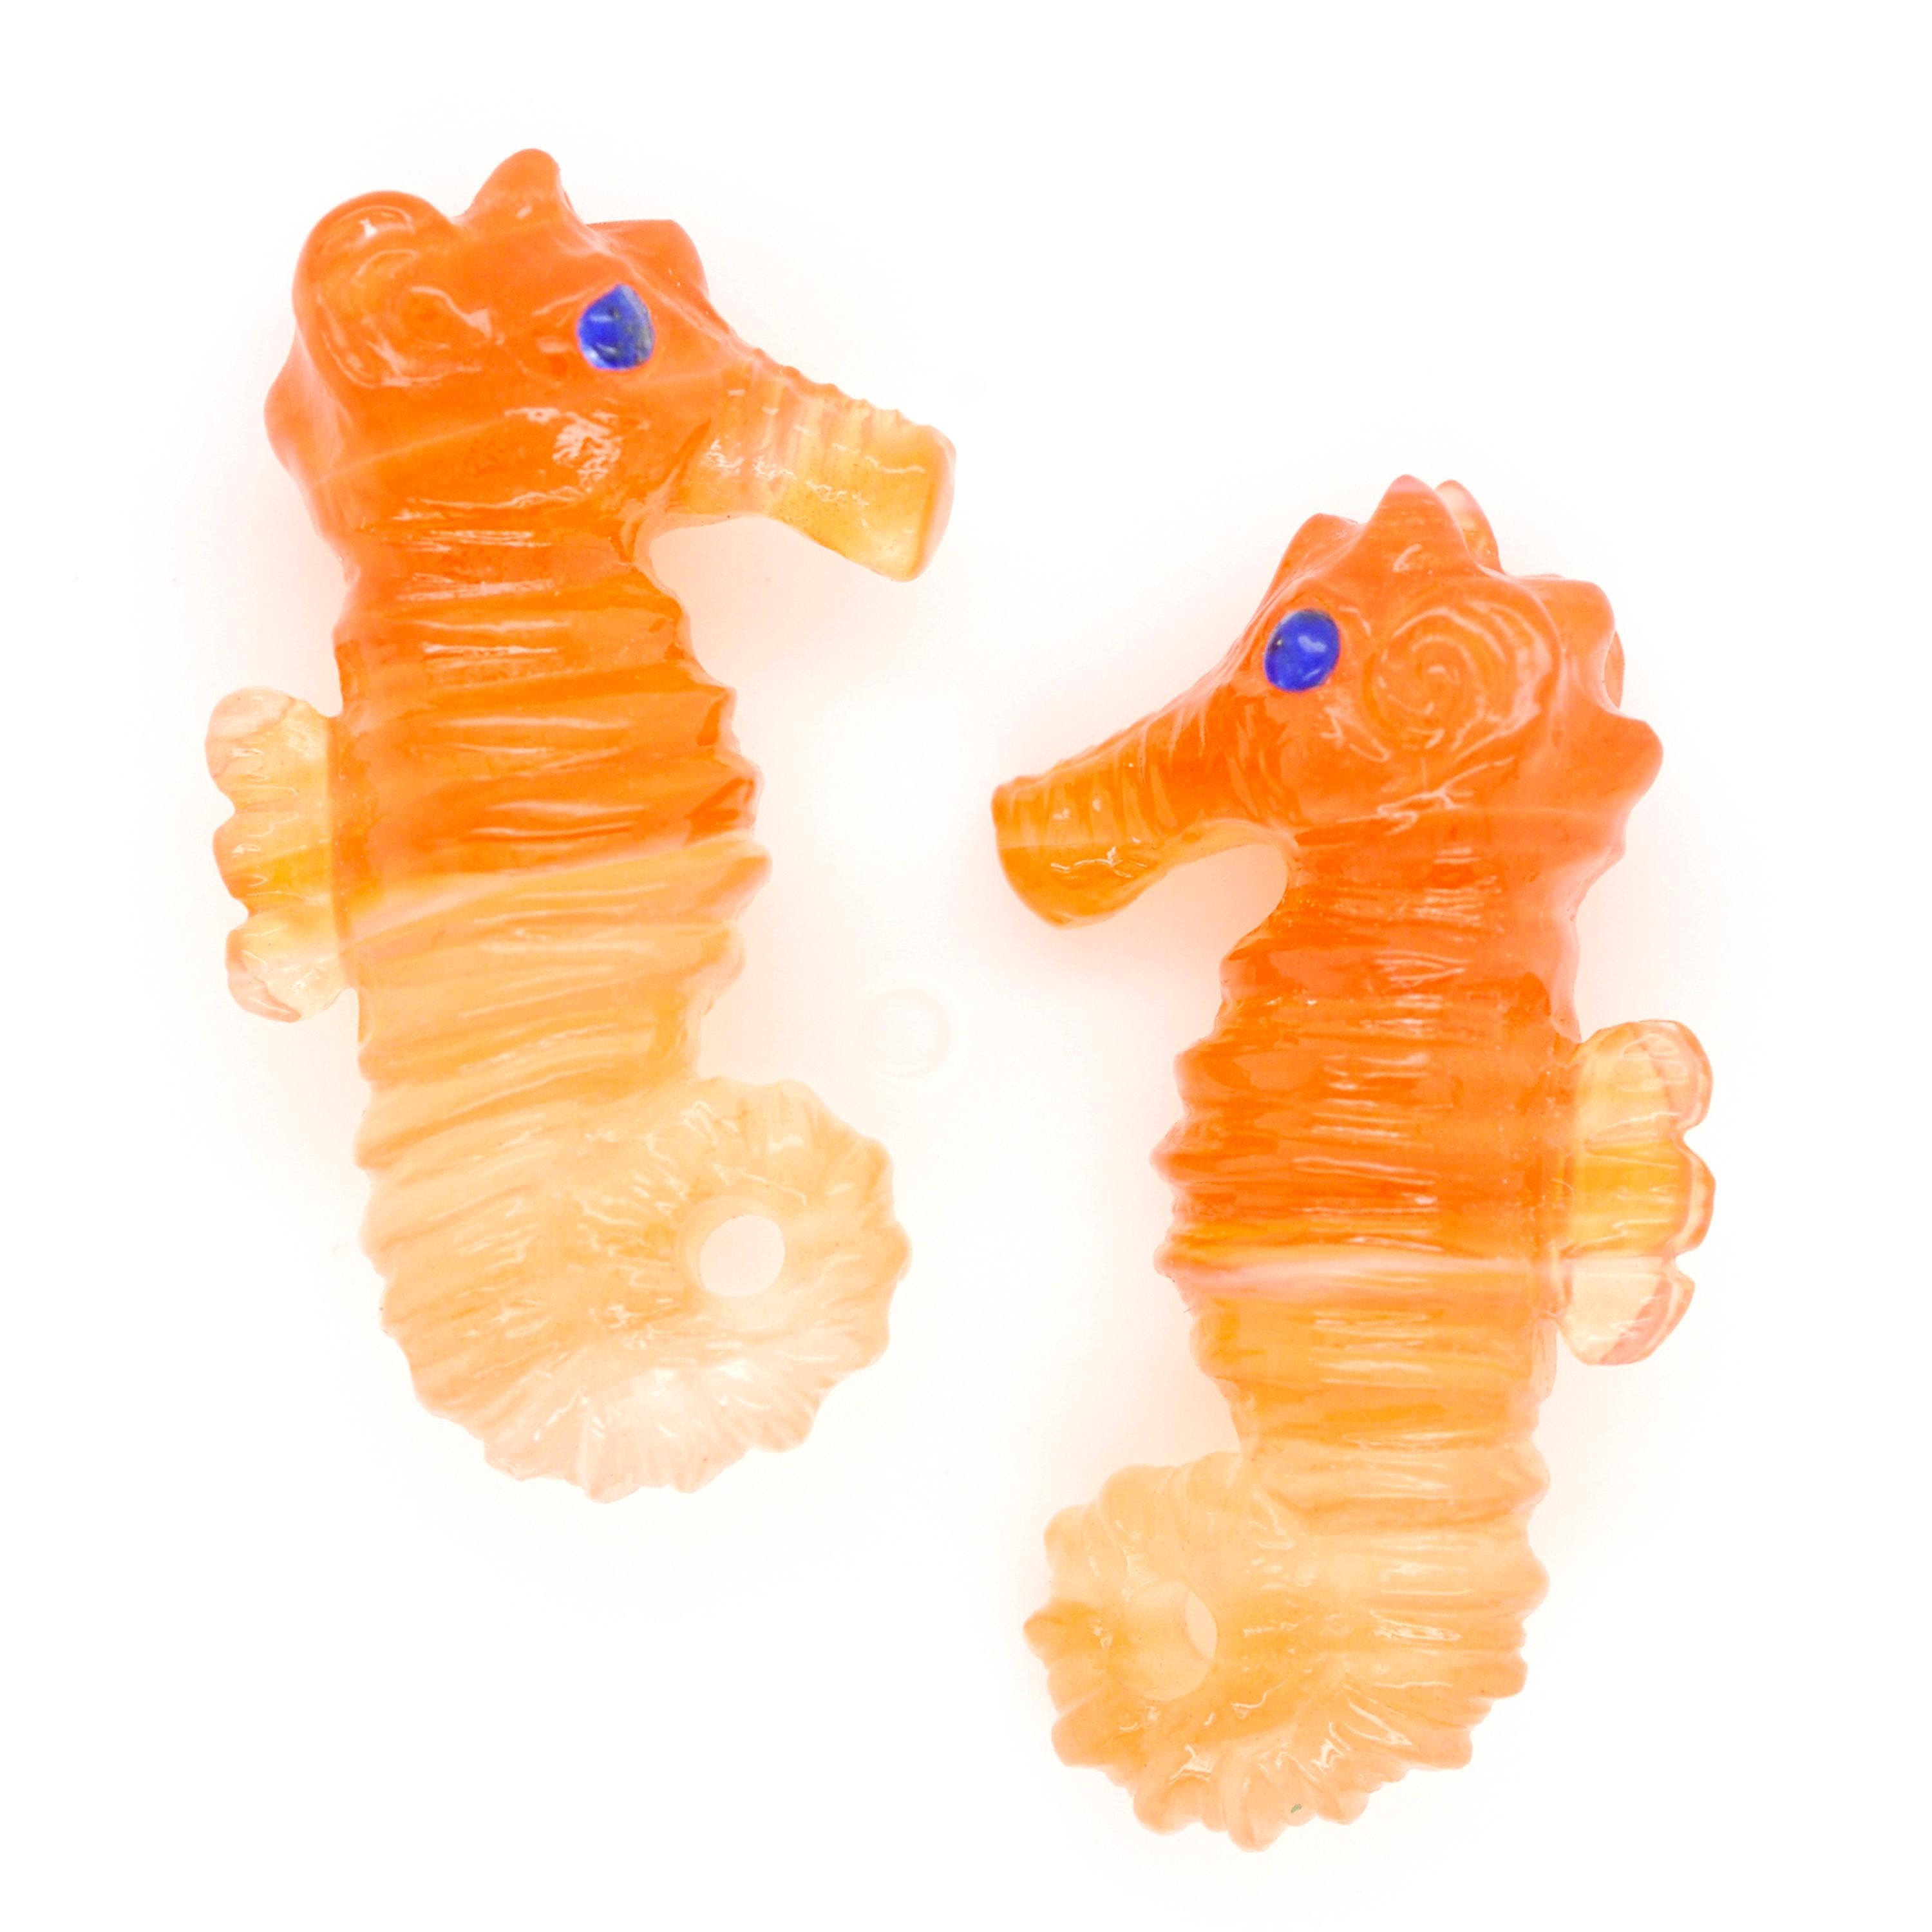 This seahorse carving on natural carnelian is hand-carved with extreme detail by our expert lapidary artist in Jaipur which transforms raw stones into unique art works. The carving is absolutely detailed and so beautiful that when adorned in a pair